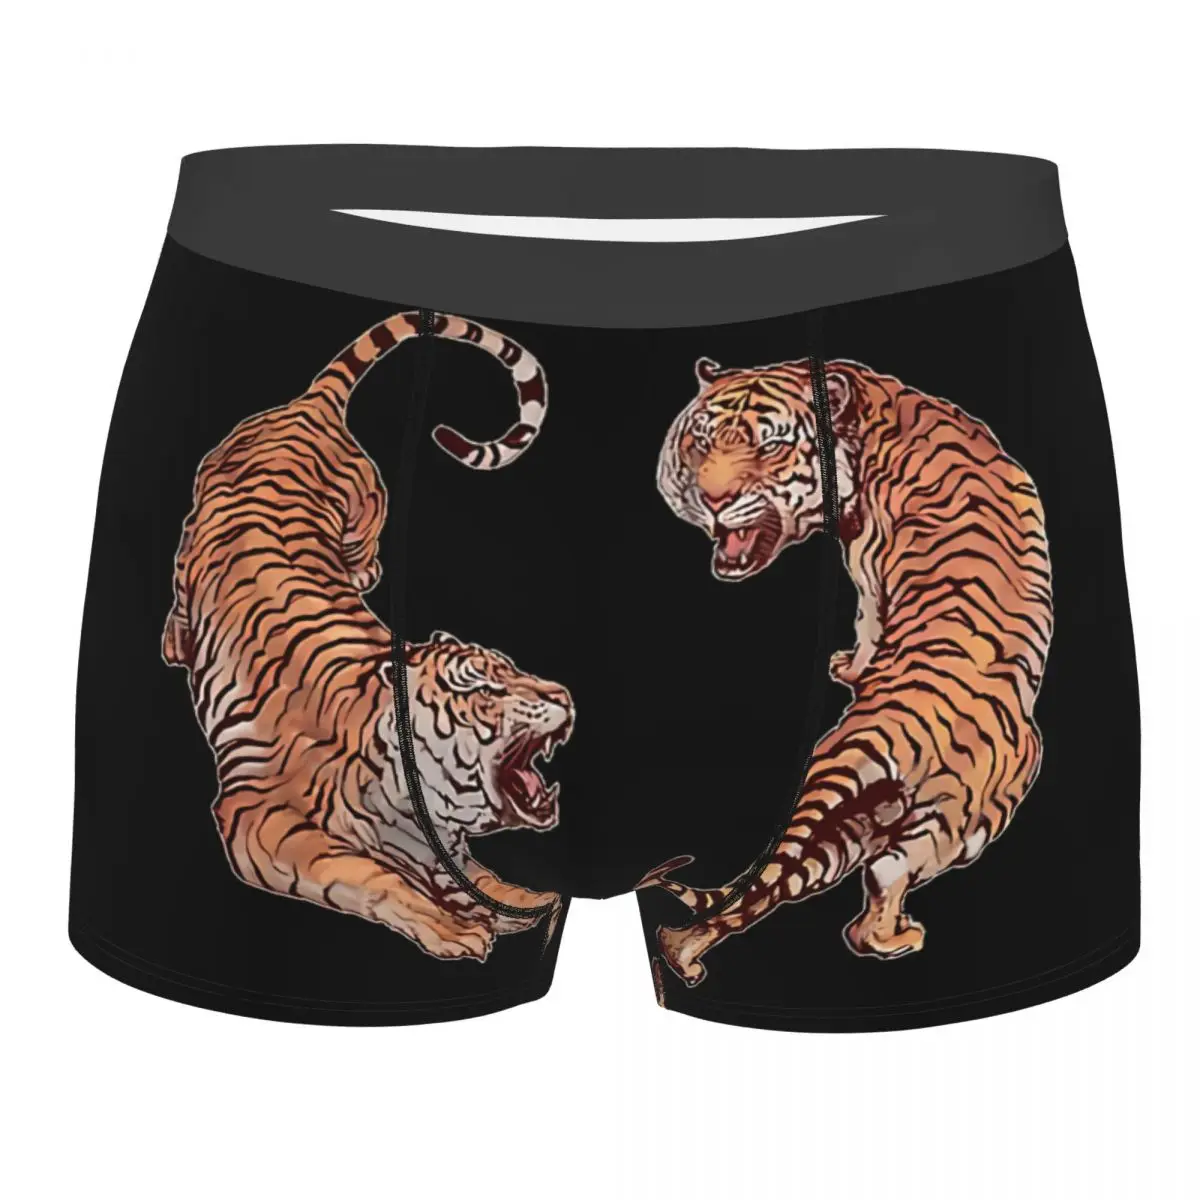 

Yin Yang Man's Boxer Briefs Tiger Animal Lover Highly Breathable Underwear High Quality Print Shorts Gift Idea